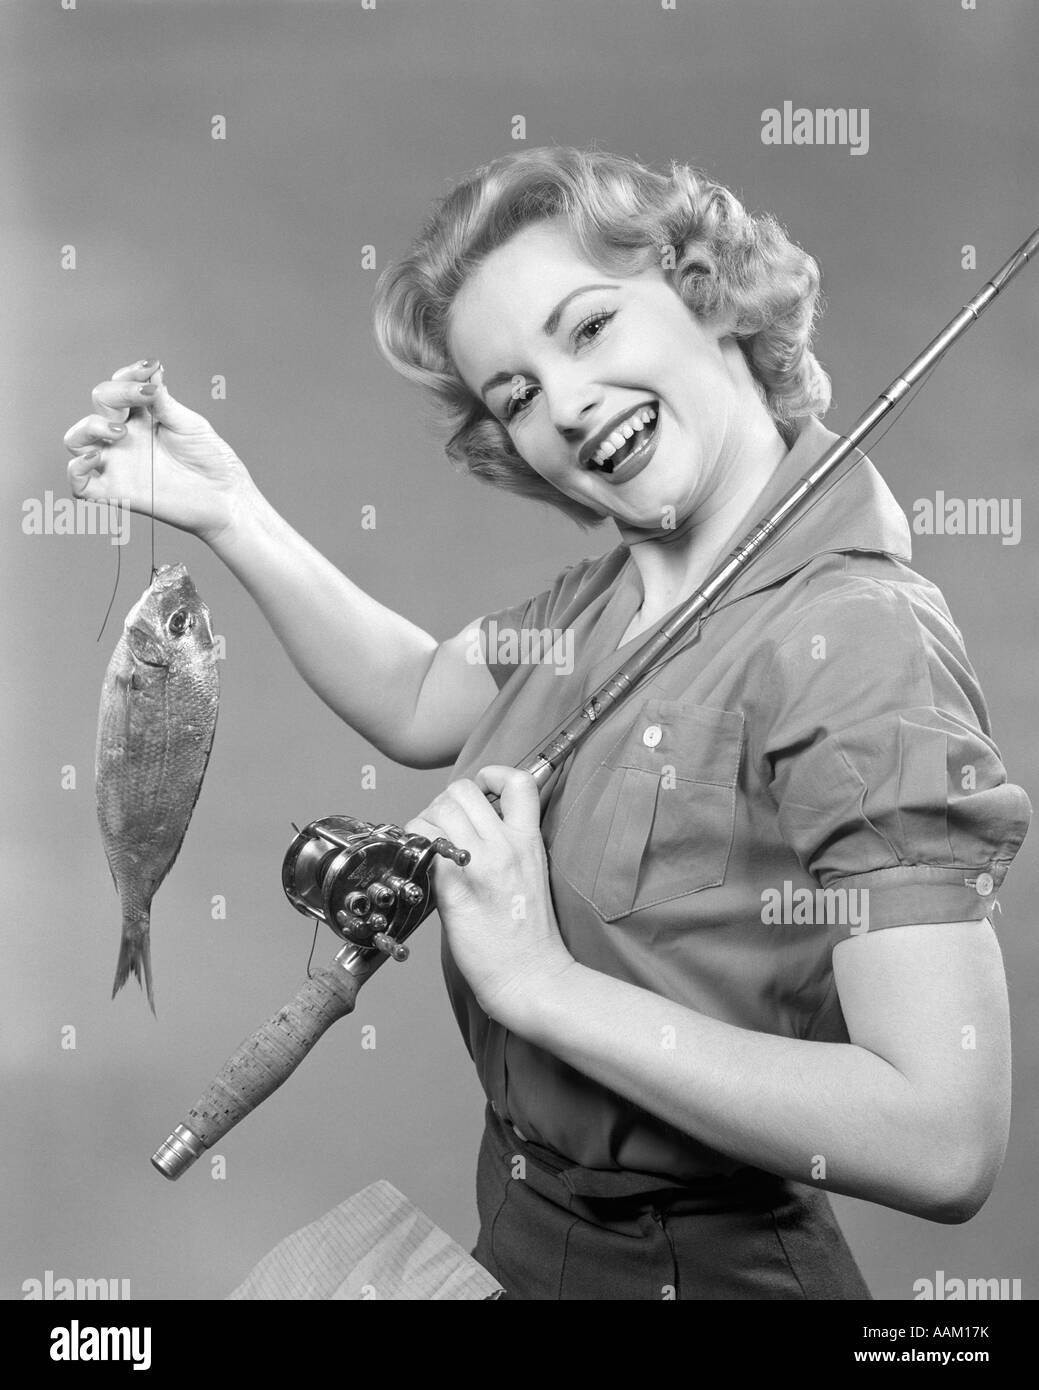 1950s SMILING WOMAN WITH A FISHING ROD OVER HER SHOULDER HOLDING